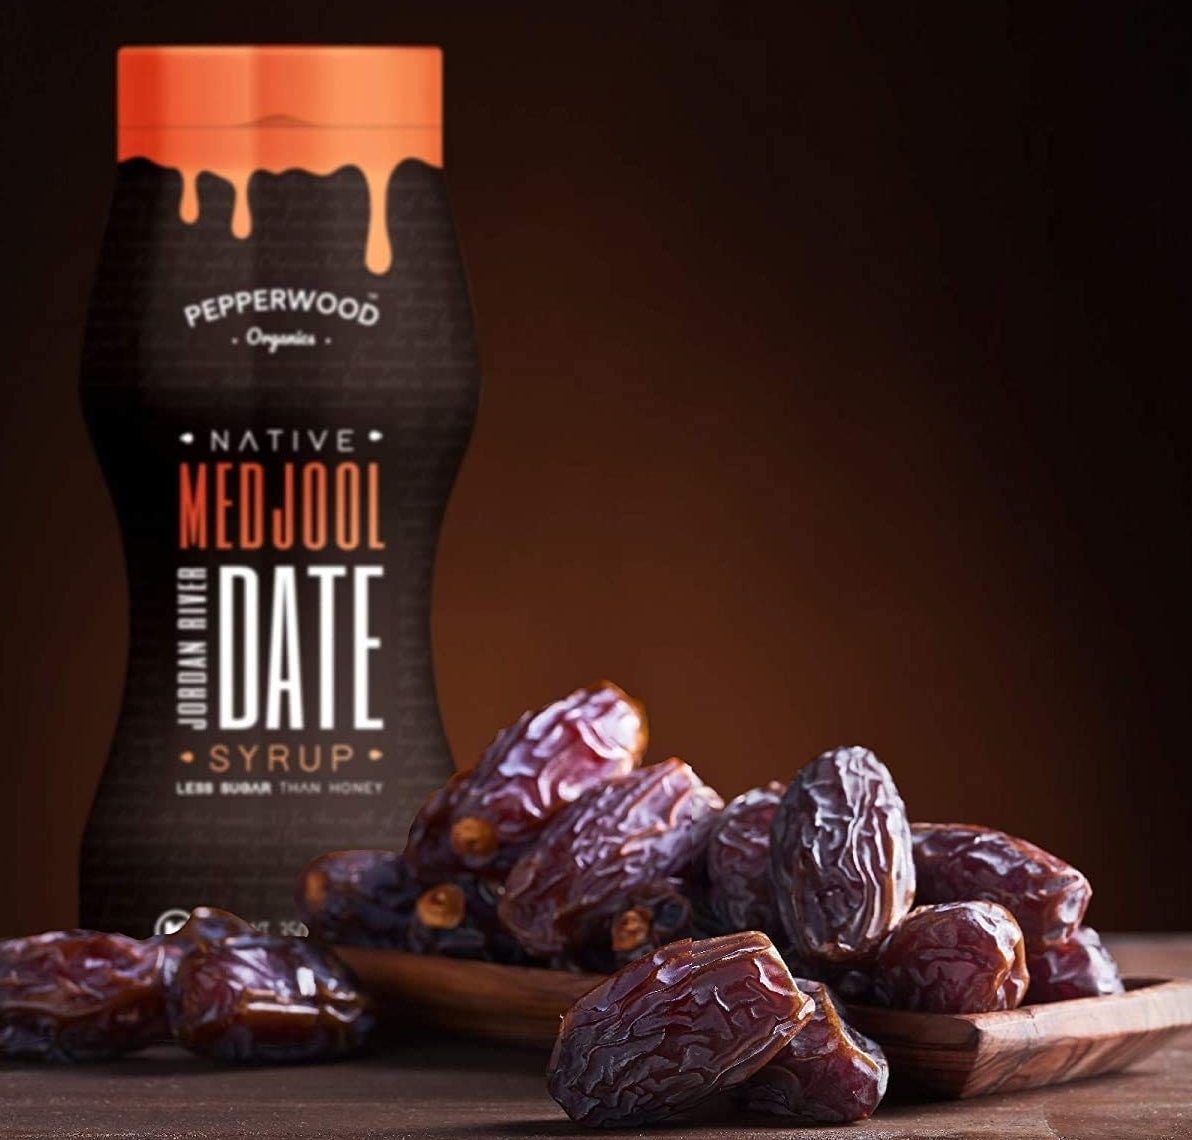 The bottle of syrup behind a pile of dates